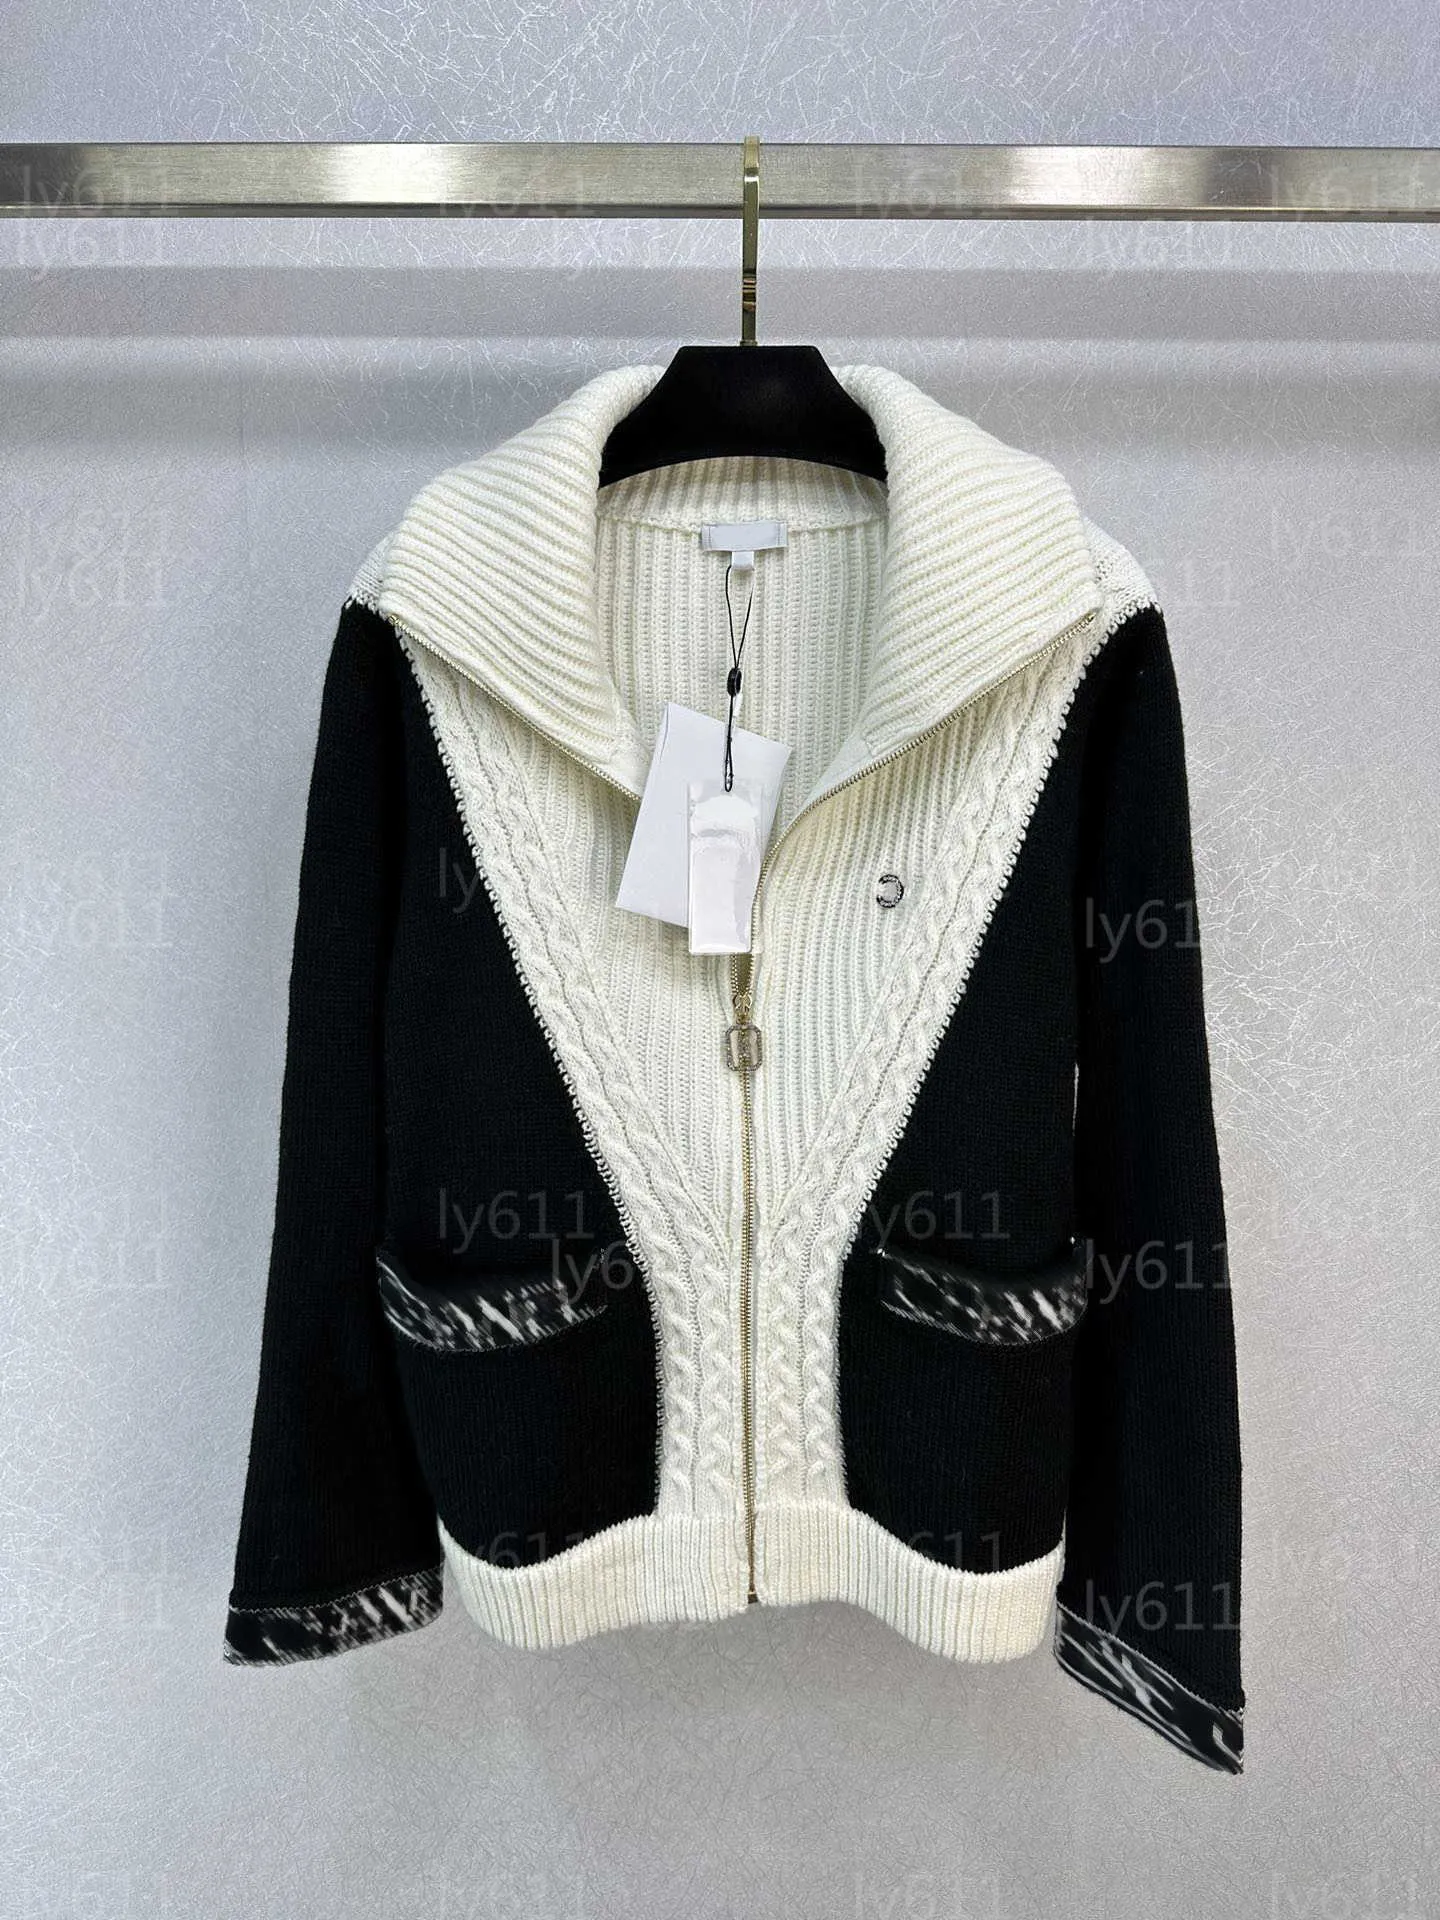 Designer Cardigan Sweater Women Jacket Knit Black And White Color Block High Neck Zippered Cardigan Embroidered Letter Casual Versatile Top Womens Sweaters